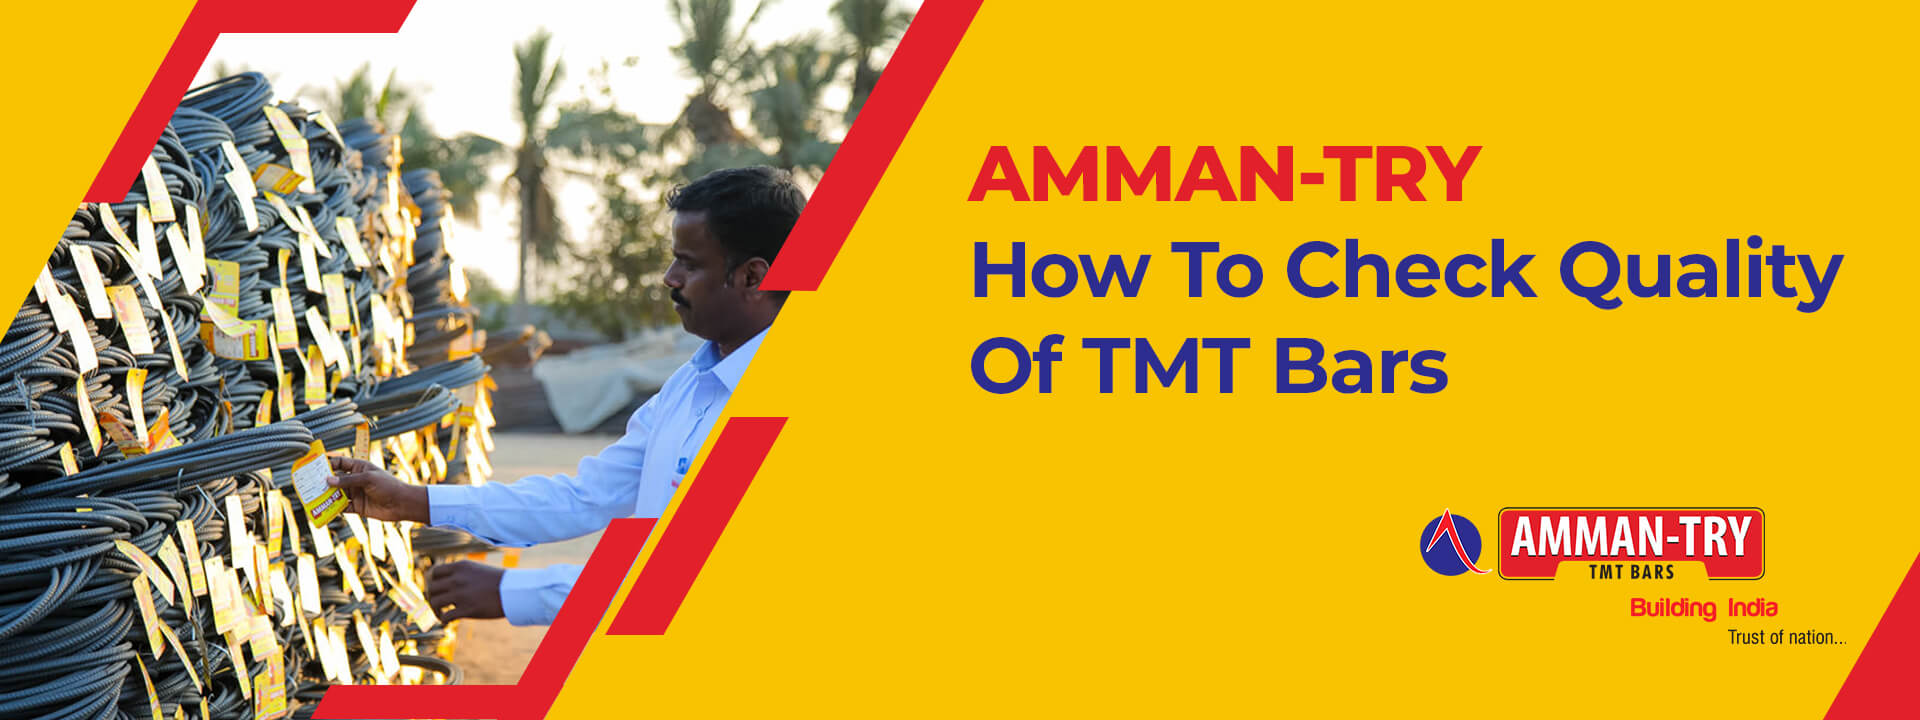 How To Check The Quality Of TMT Bars